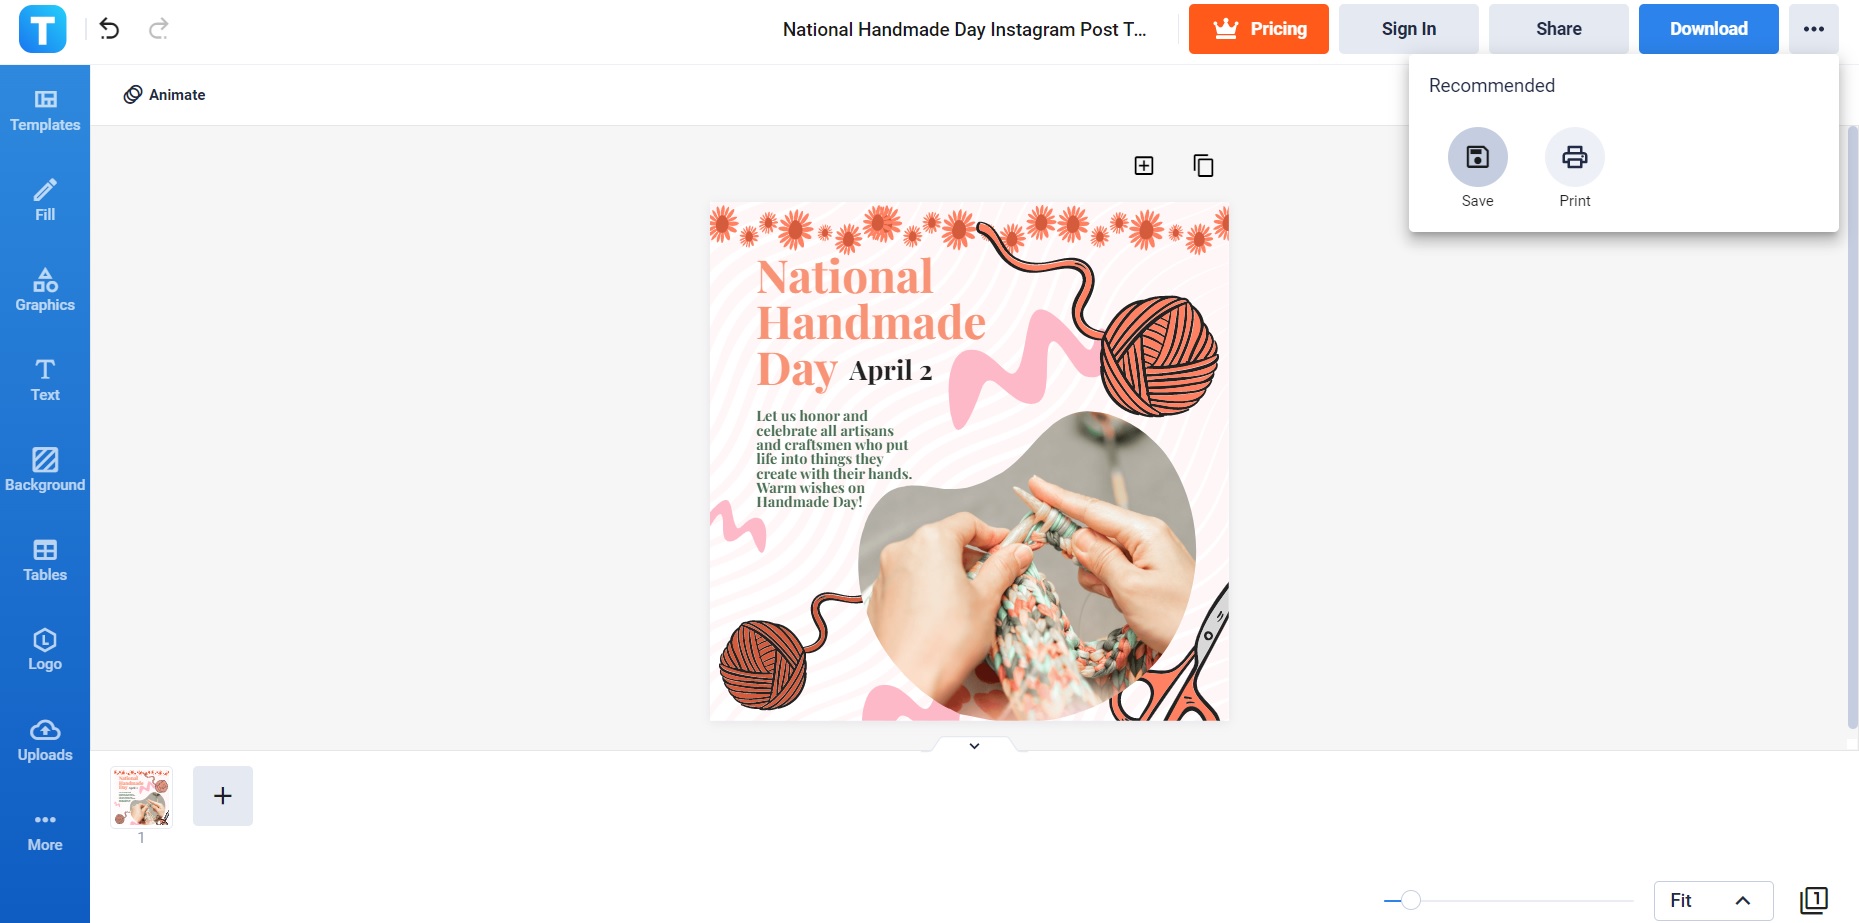 review save and upload your national handmade day post to your instagram